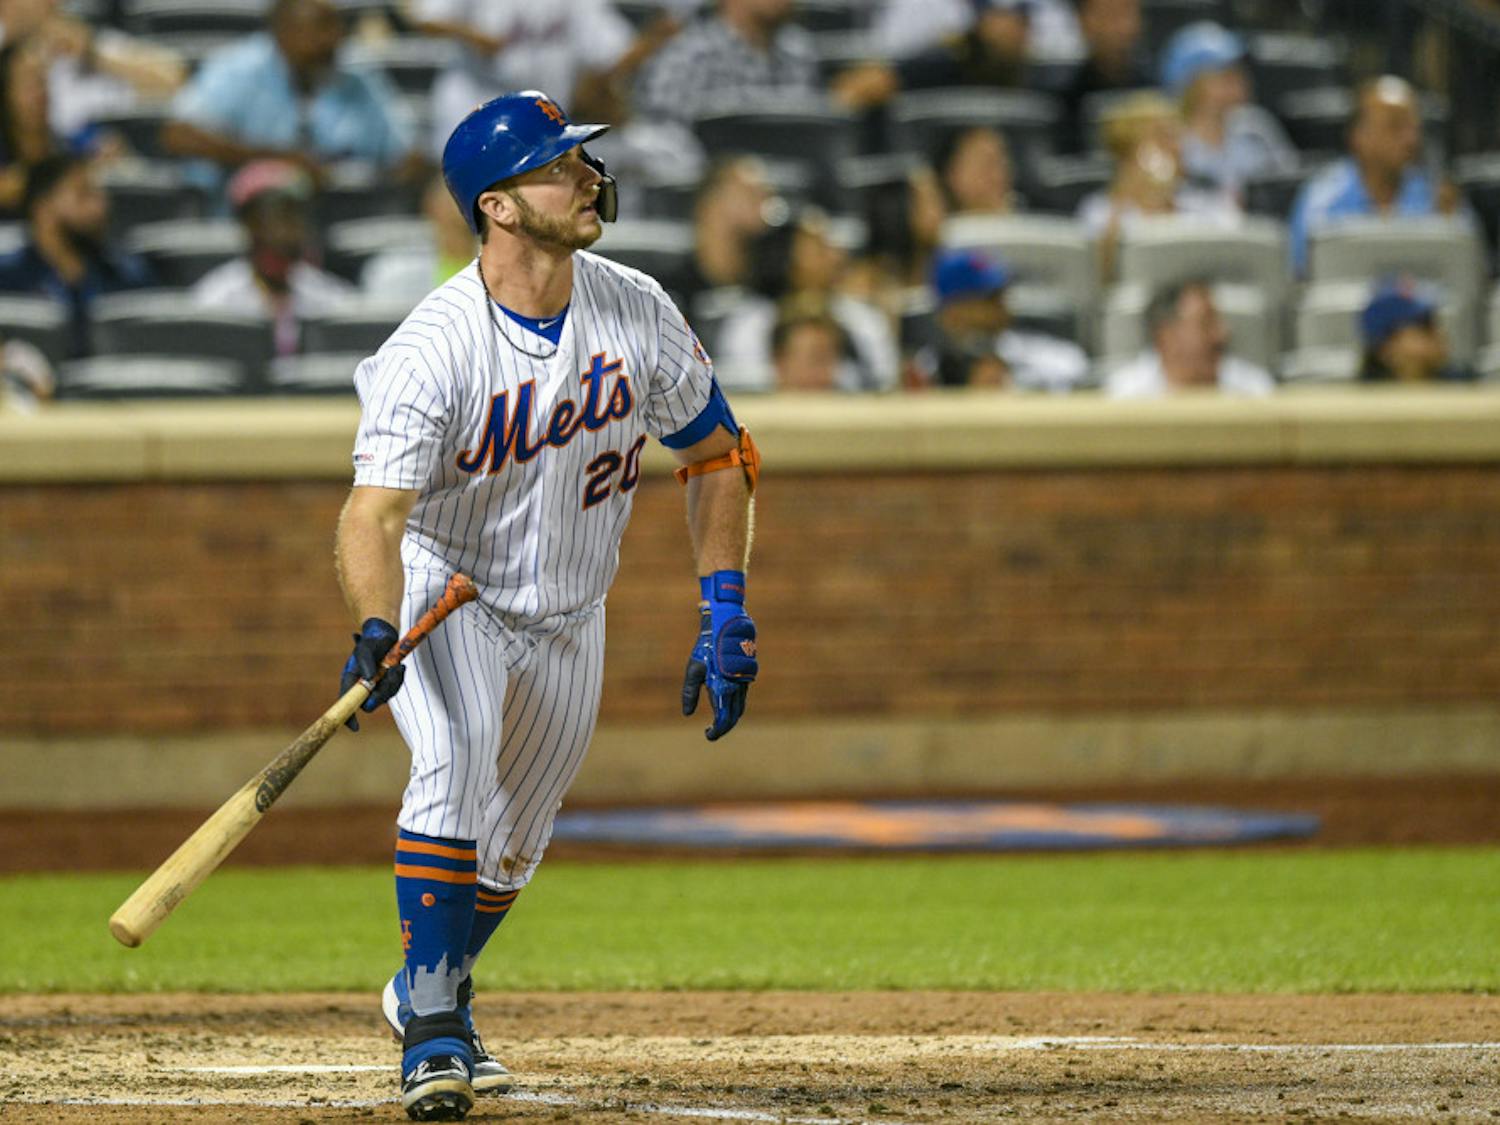 Pete Alonso leads all rookies with 34 home runs and 77 RBIs.